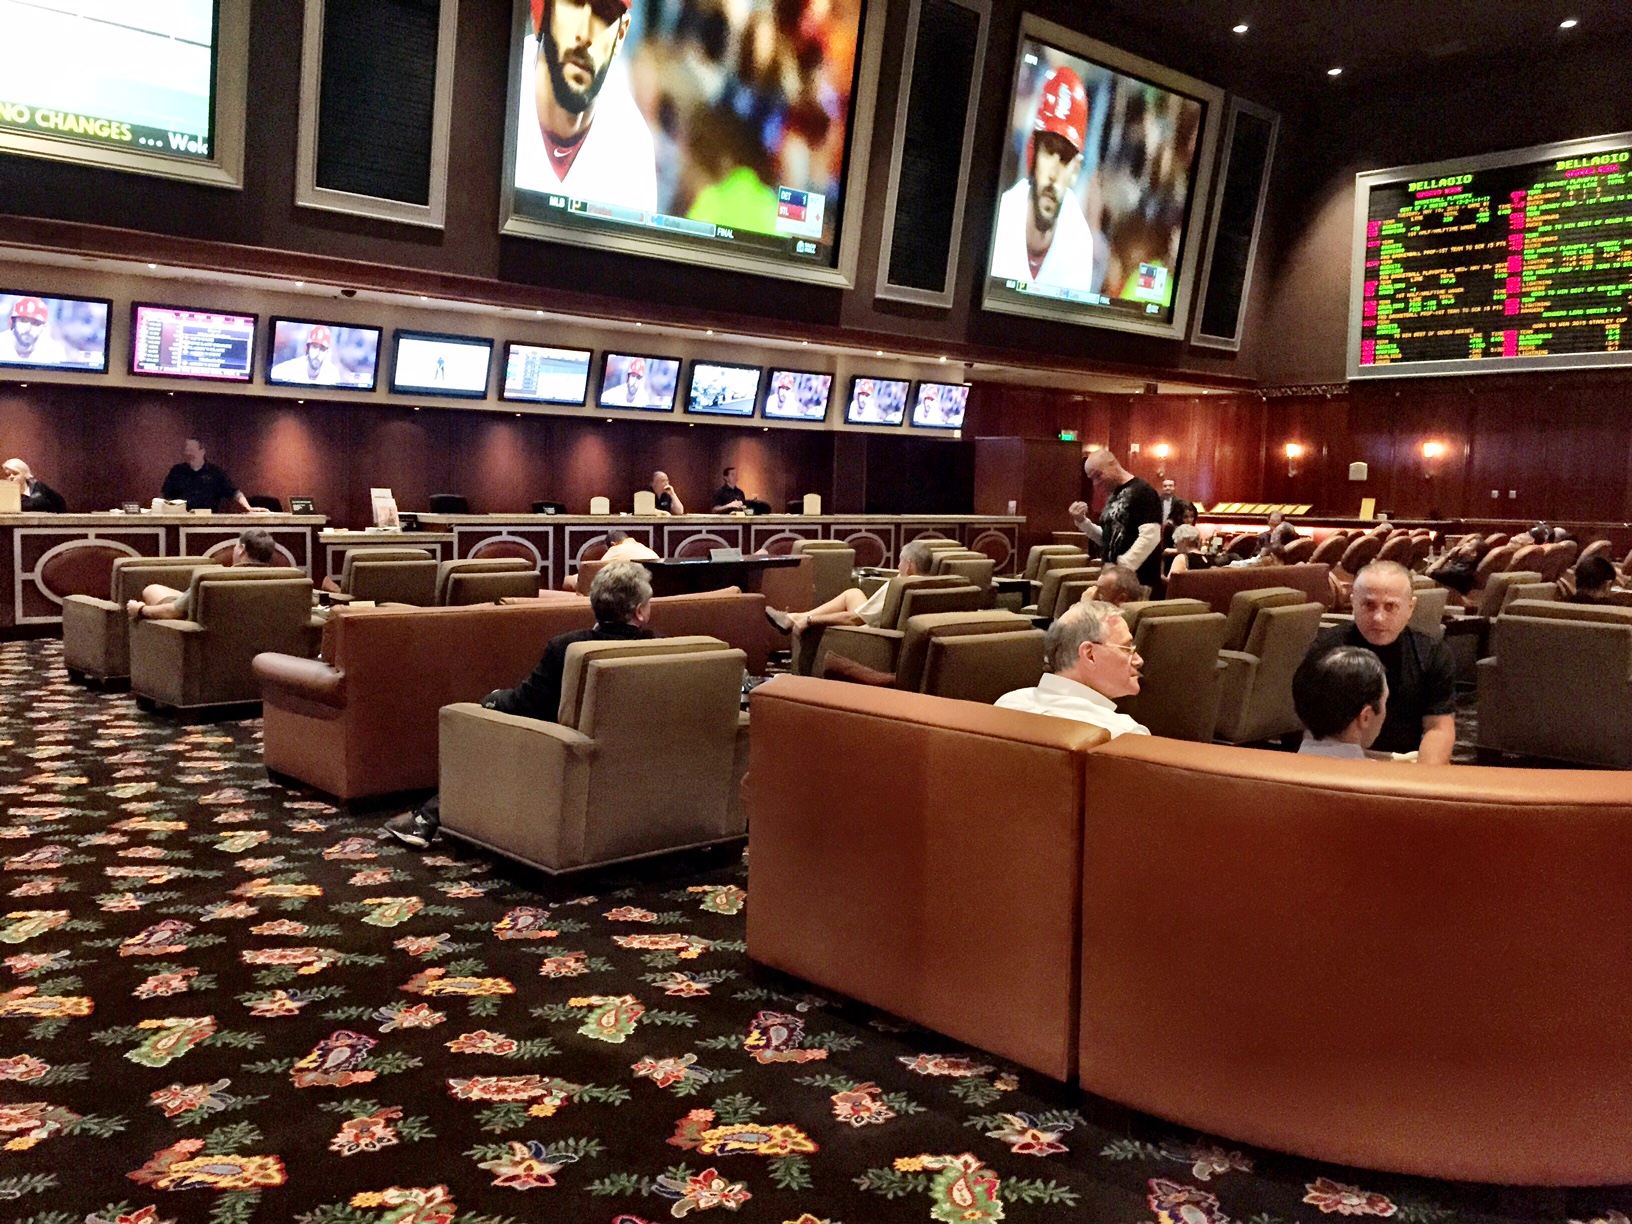 stations casinos sports bets